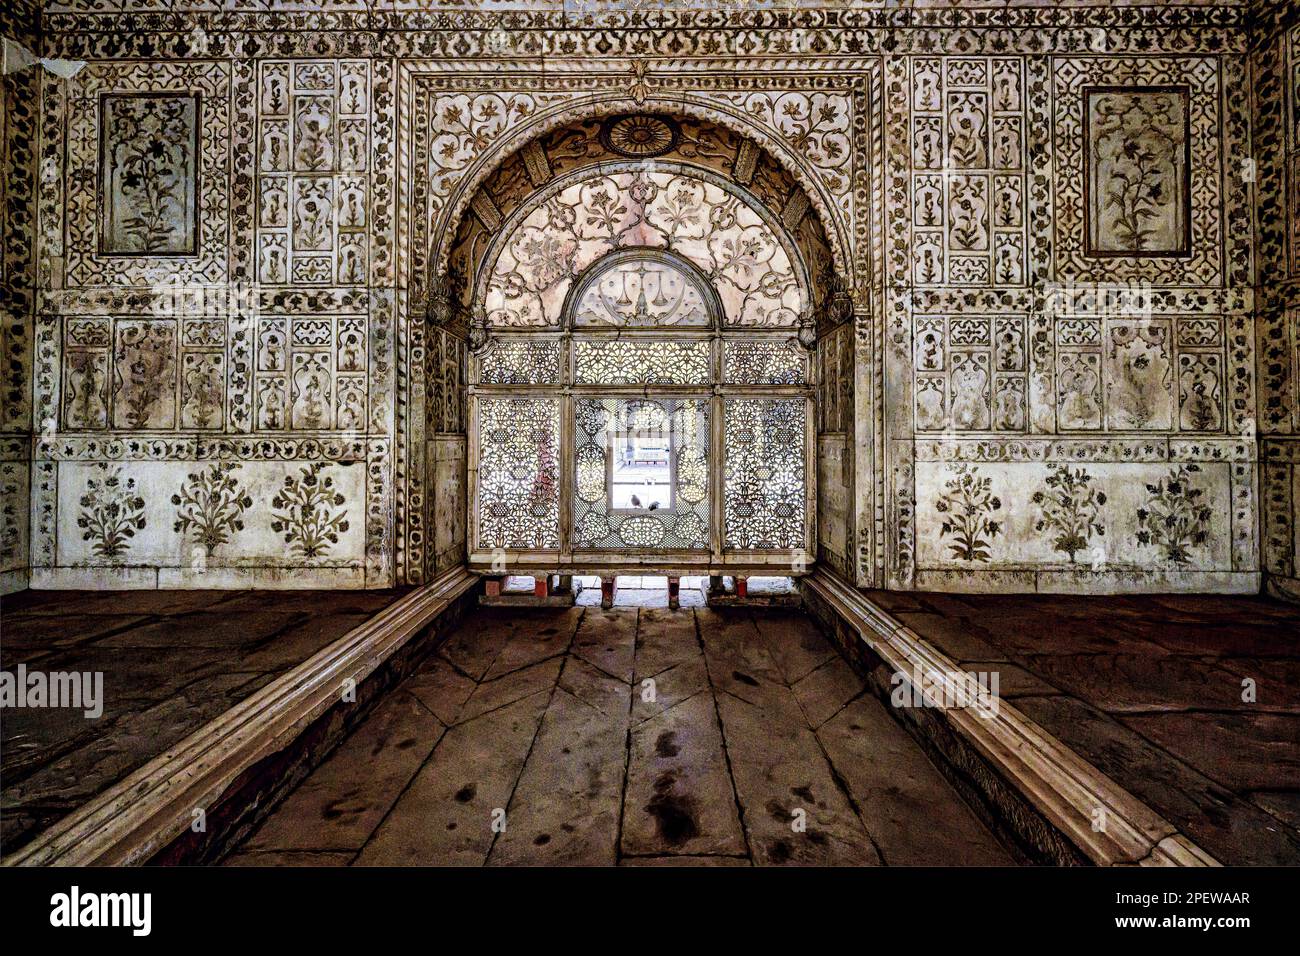 The pierced and inlaid white marble screen in the Khas Mahal - the Hall of Private Audiences, in the imperial residence in the Red Fort at Delhi Stock Photo